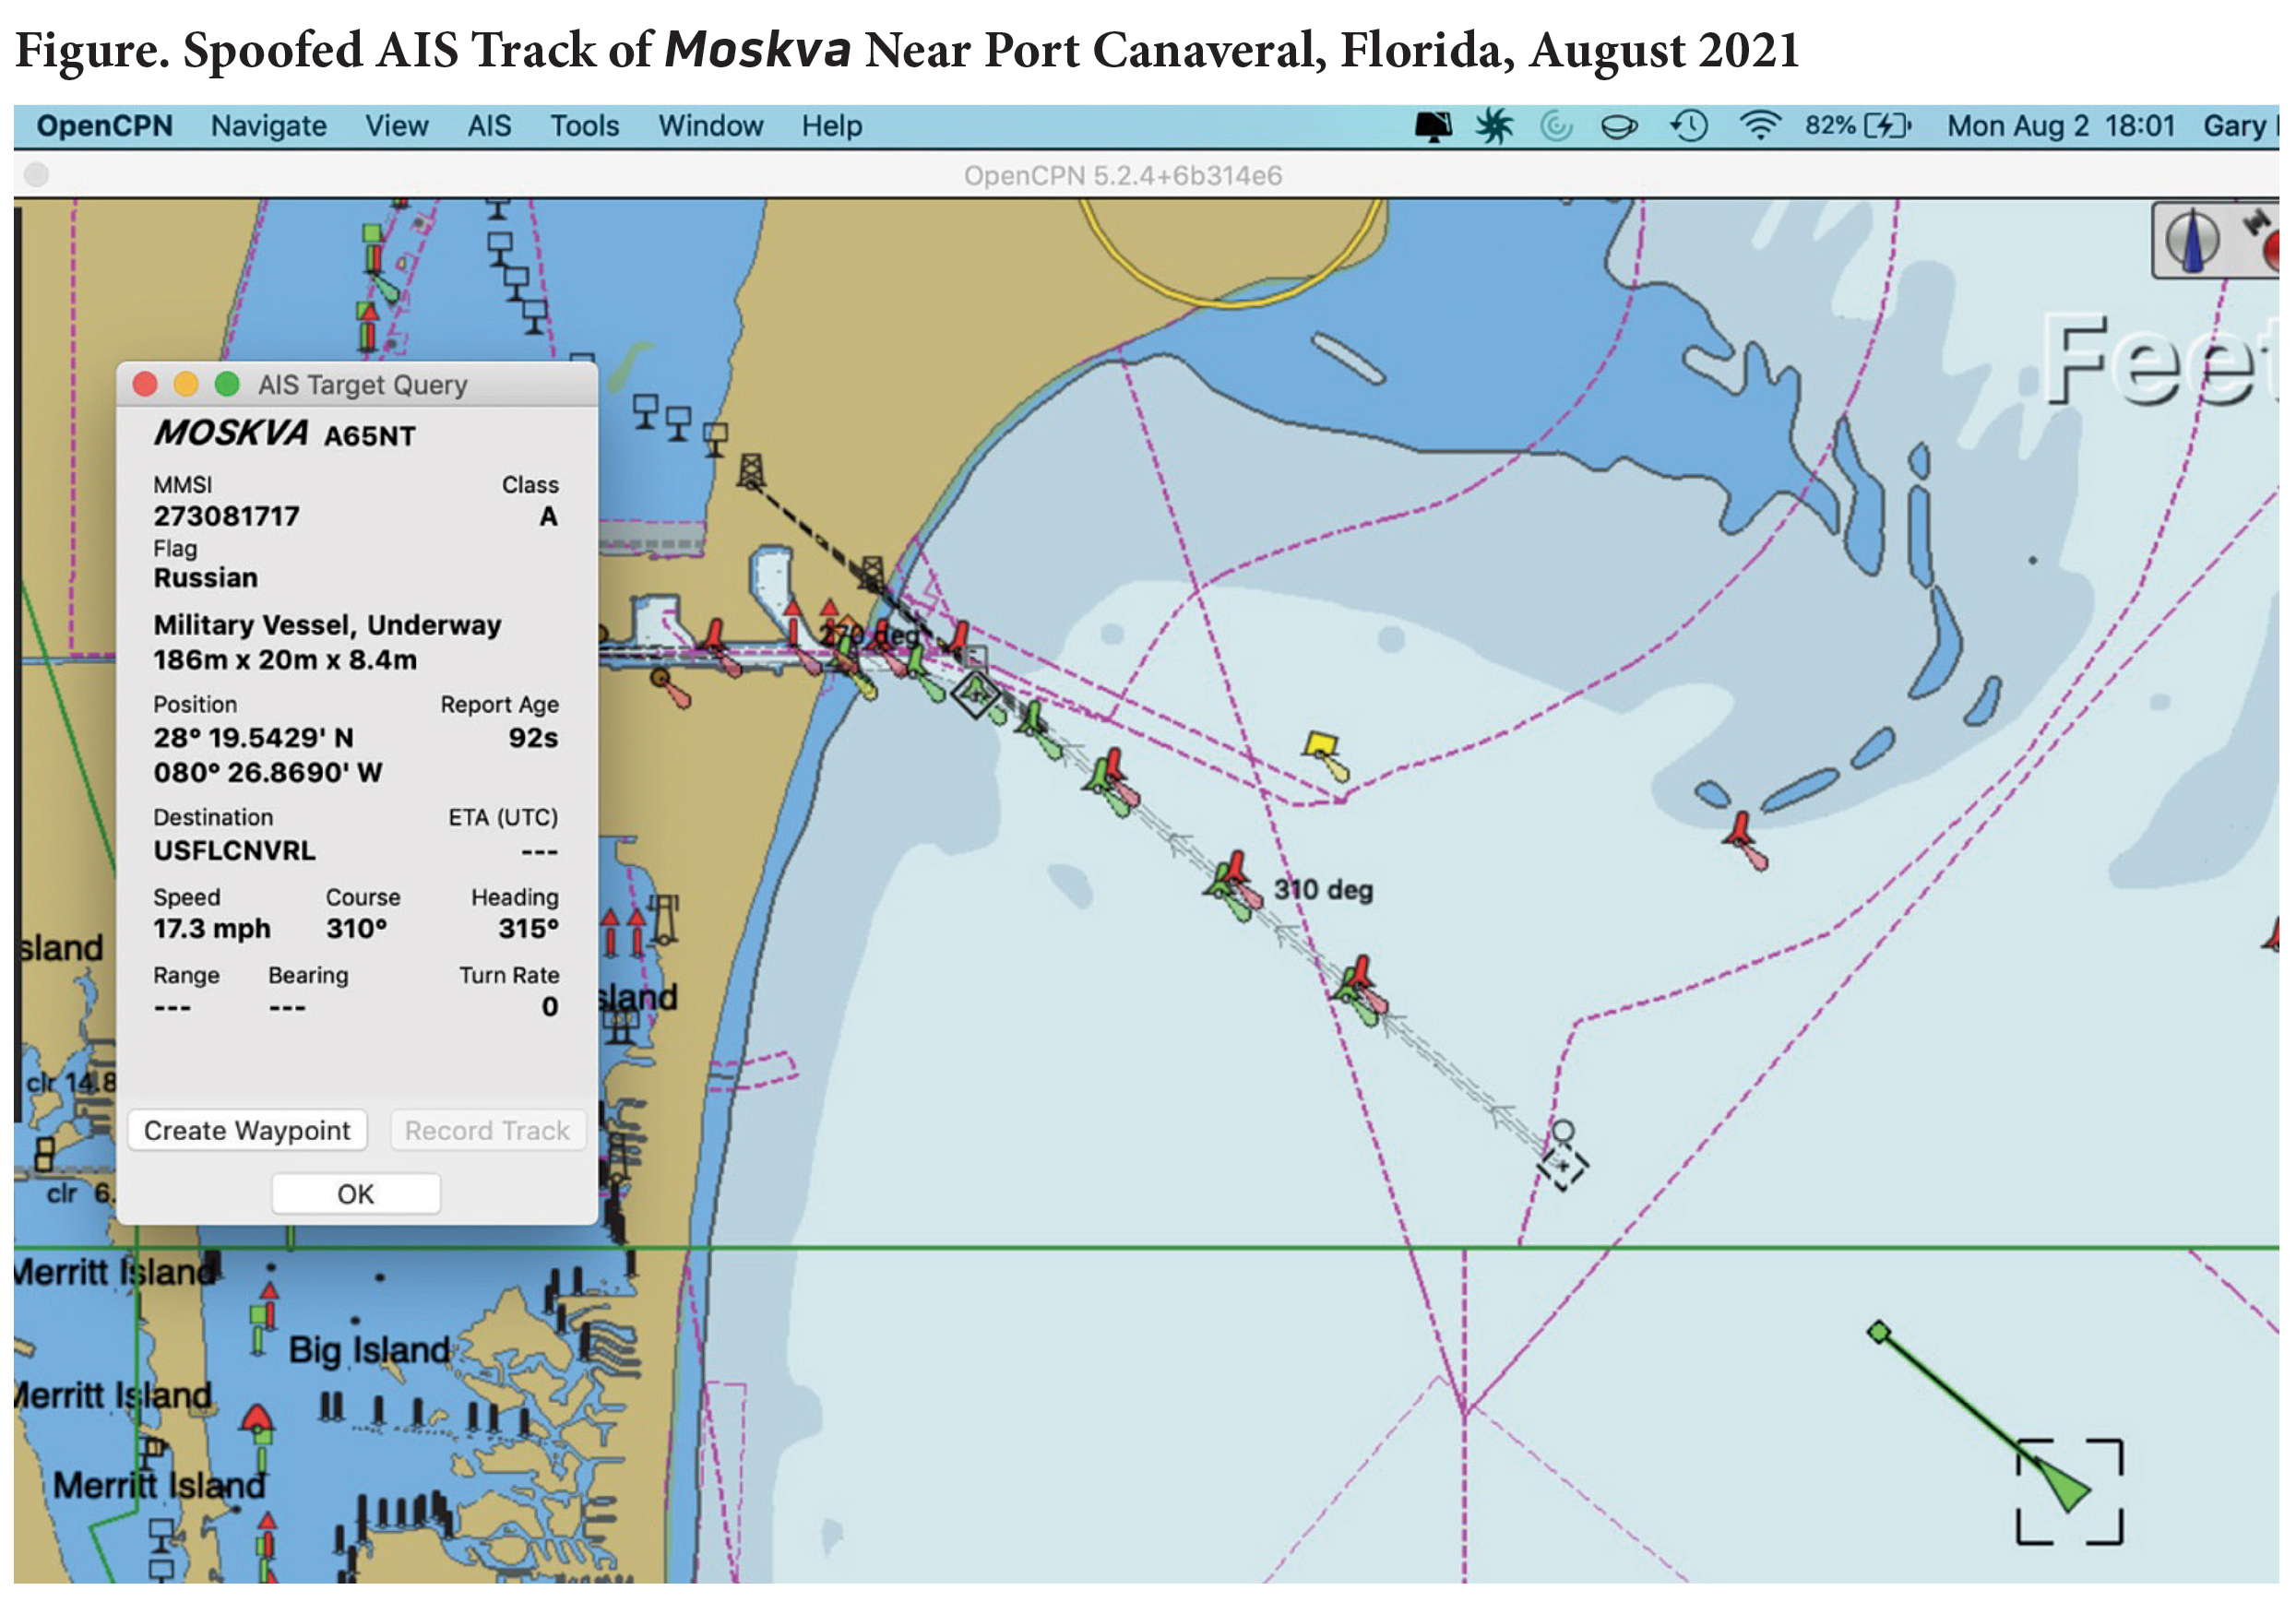 Figure. Spoofed AIS Track of Moskva Near Port Canaveral, Florida, August 2021